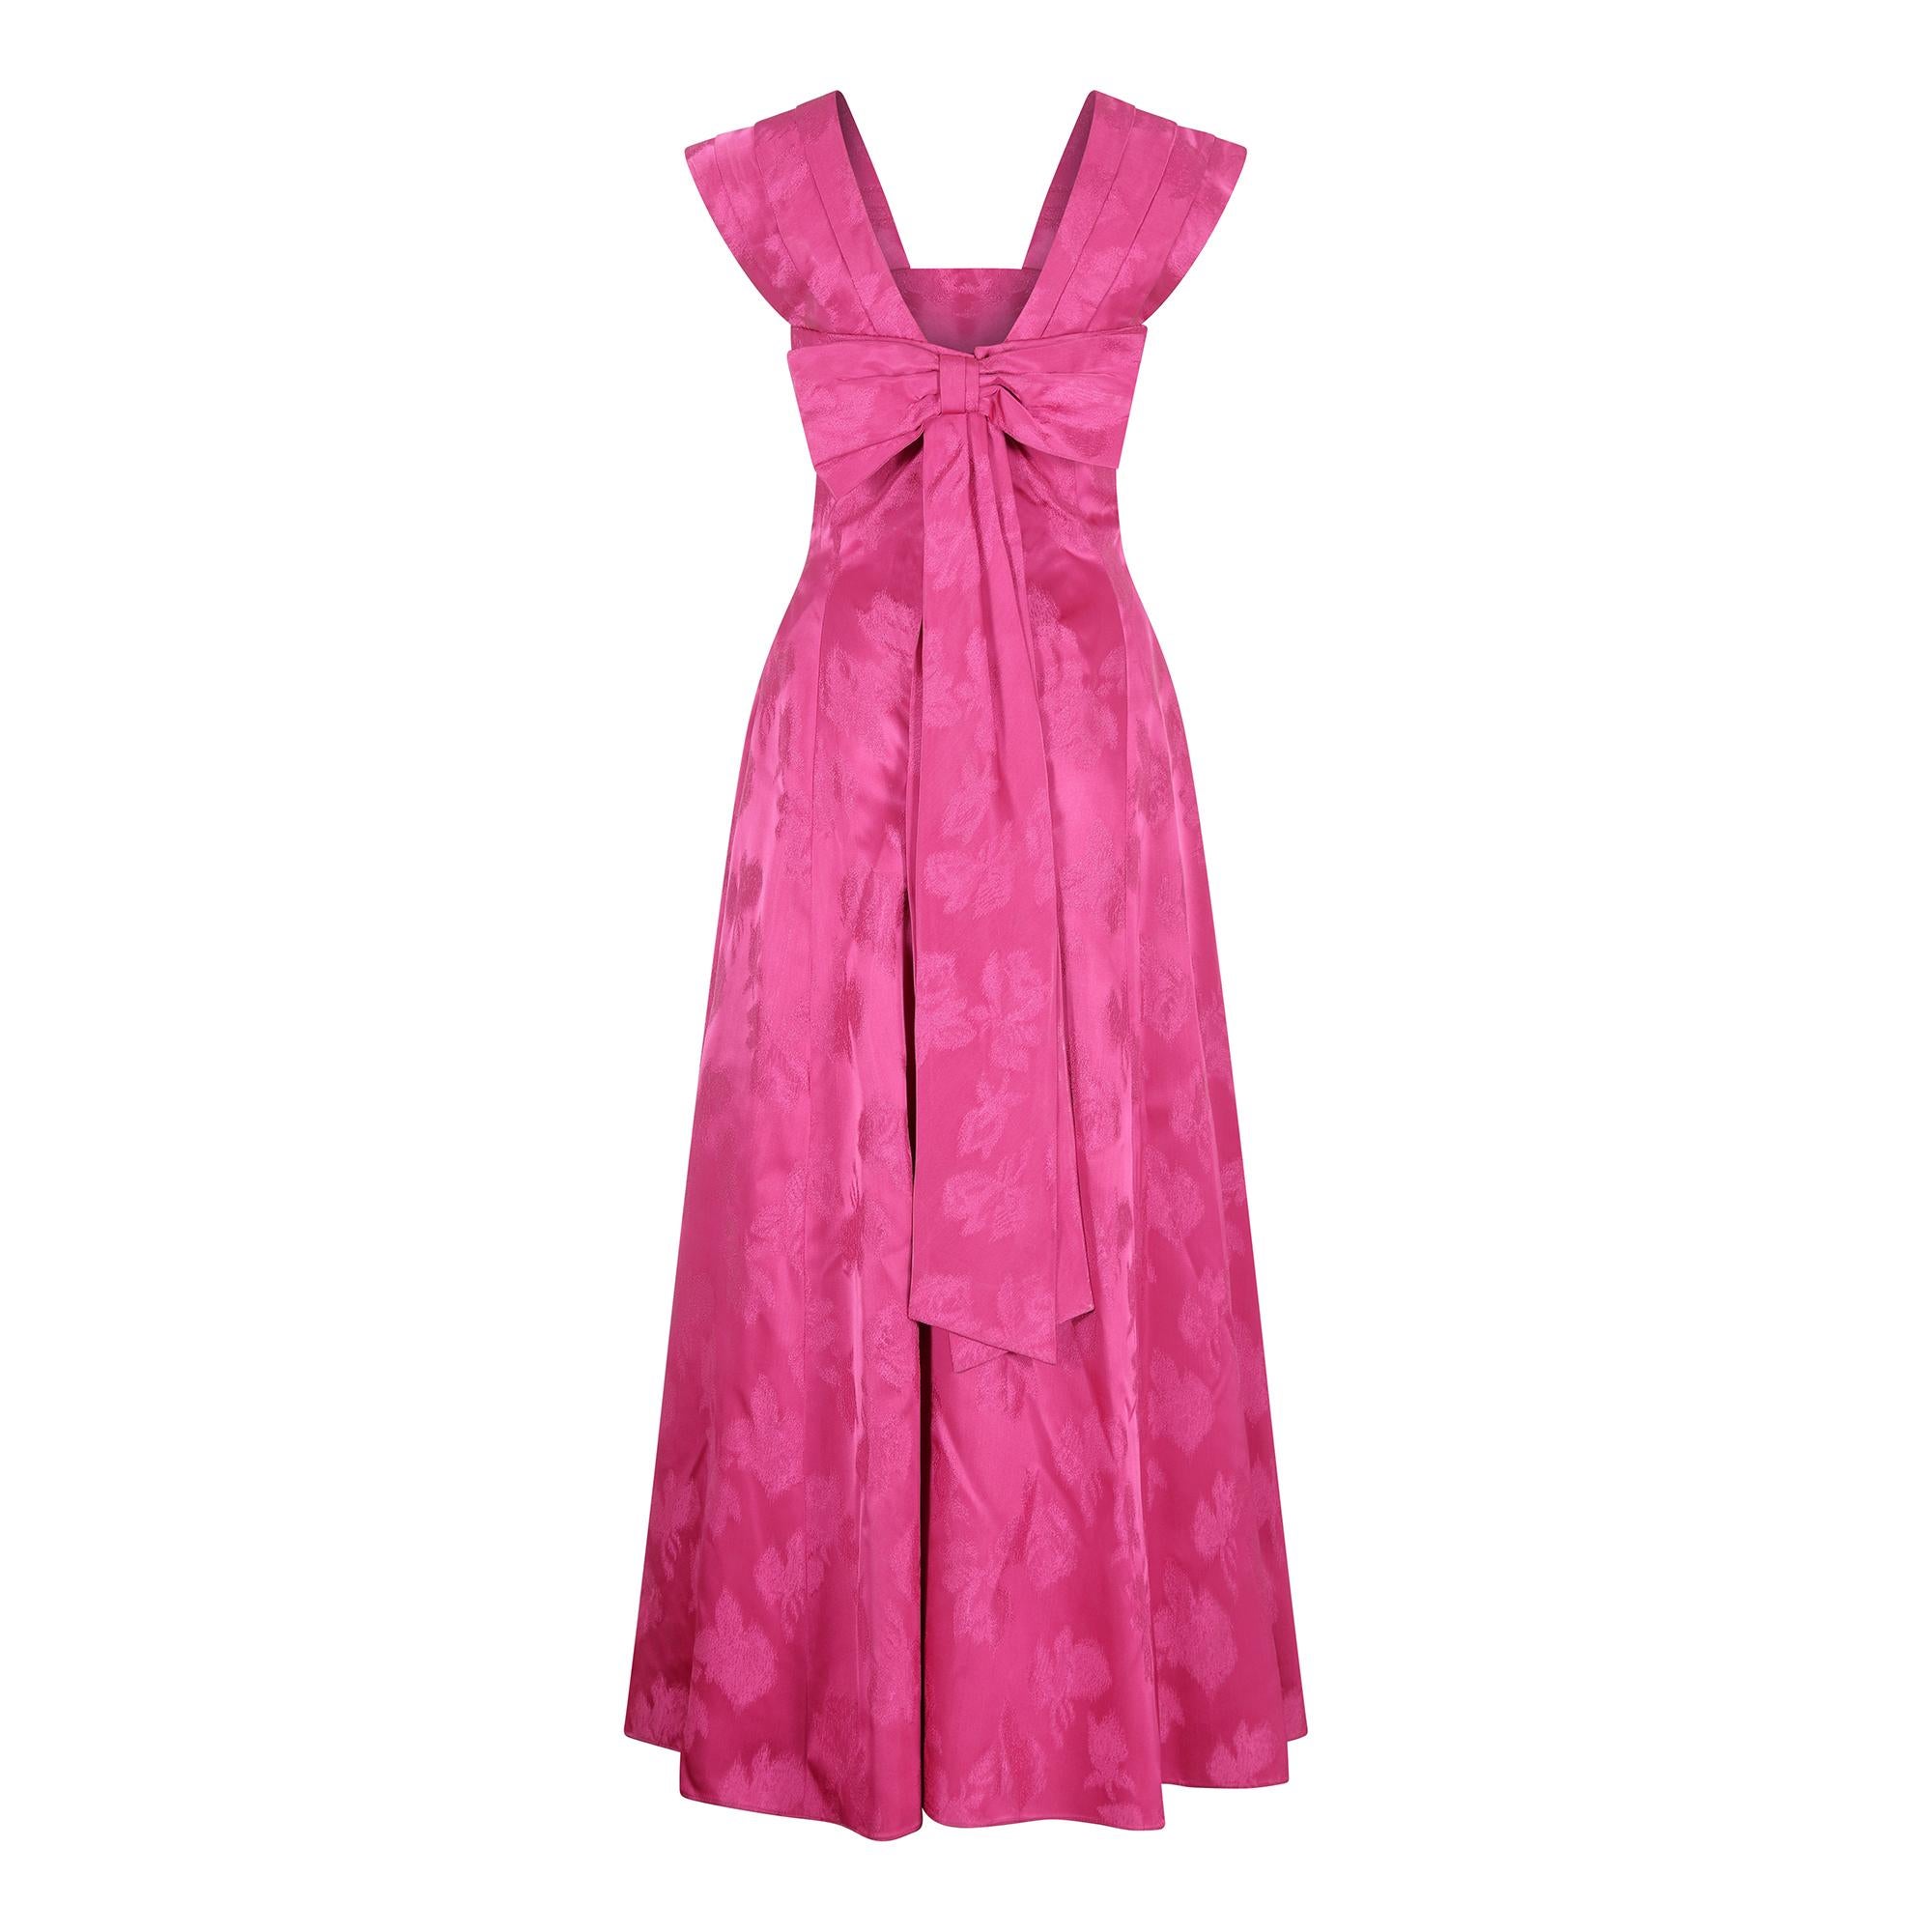 A superb and magnificent magenta coloured floral print satin evening dress from the mid-1950s.  Formal wear from this era is becoming increasingly difficult to source and this is a beautifully made evening gown with good technique and classic